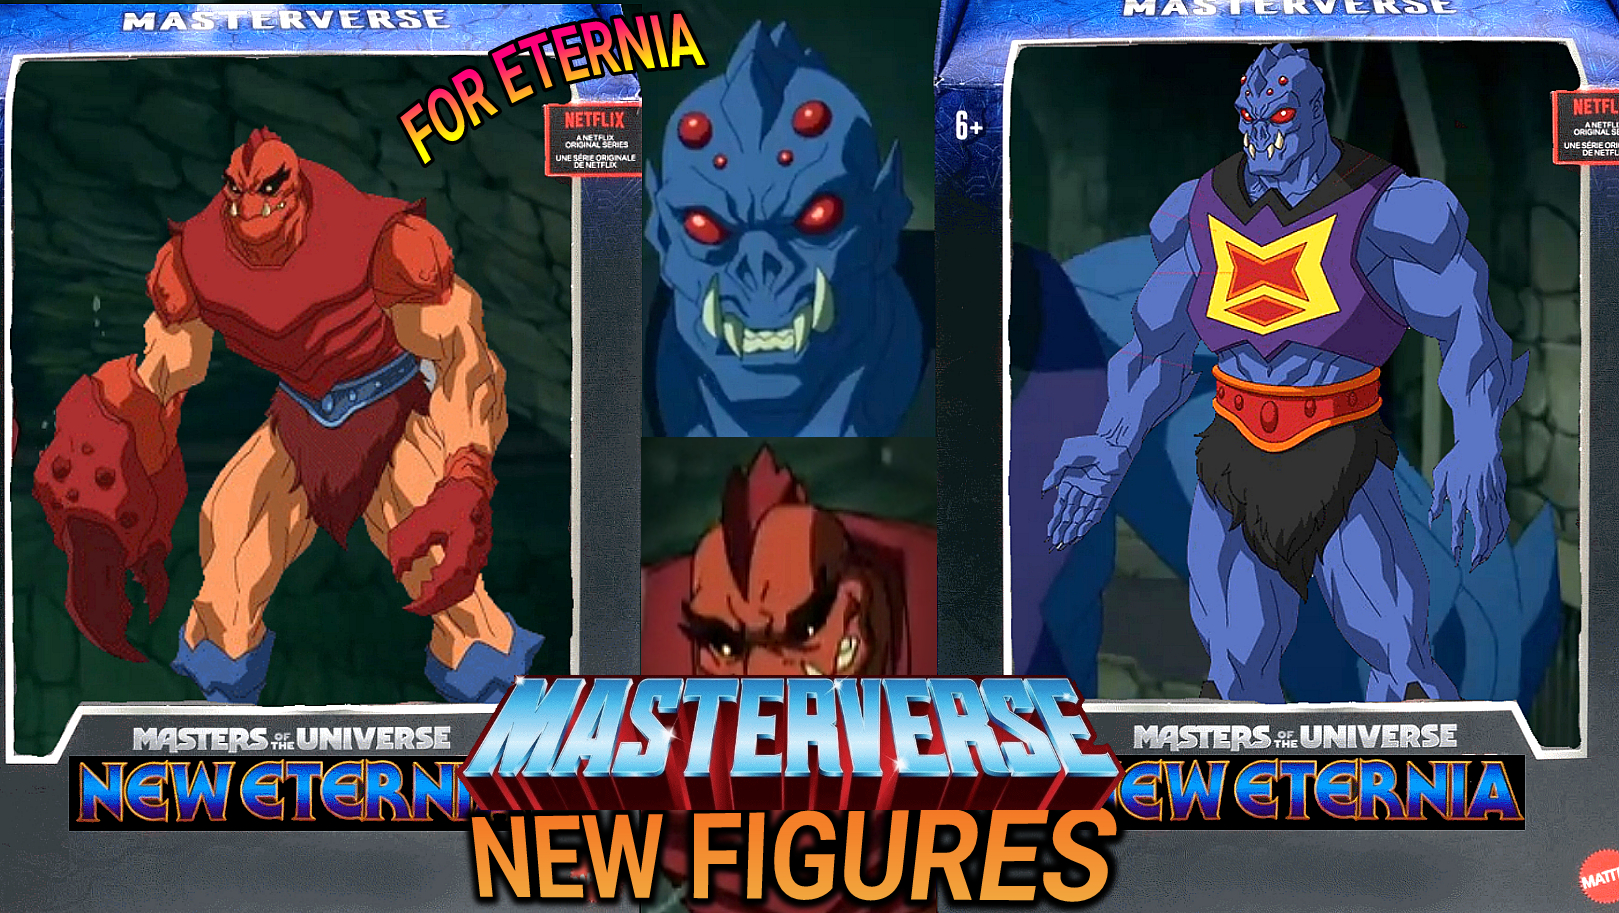 New Masterverse Figures Revealed: New Eternia Webstor and Deluxe New Eternia Clawful